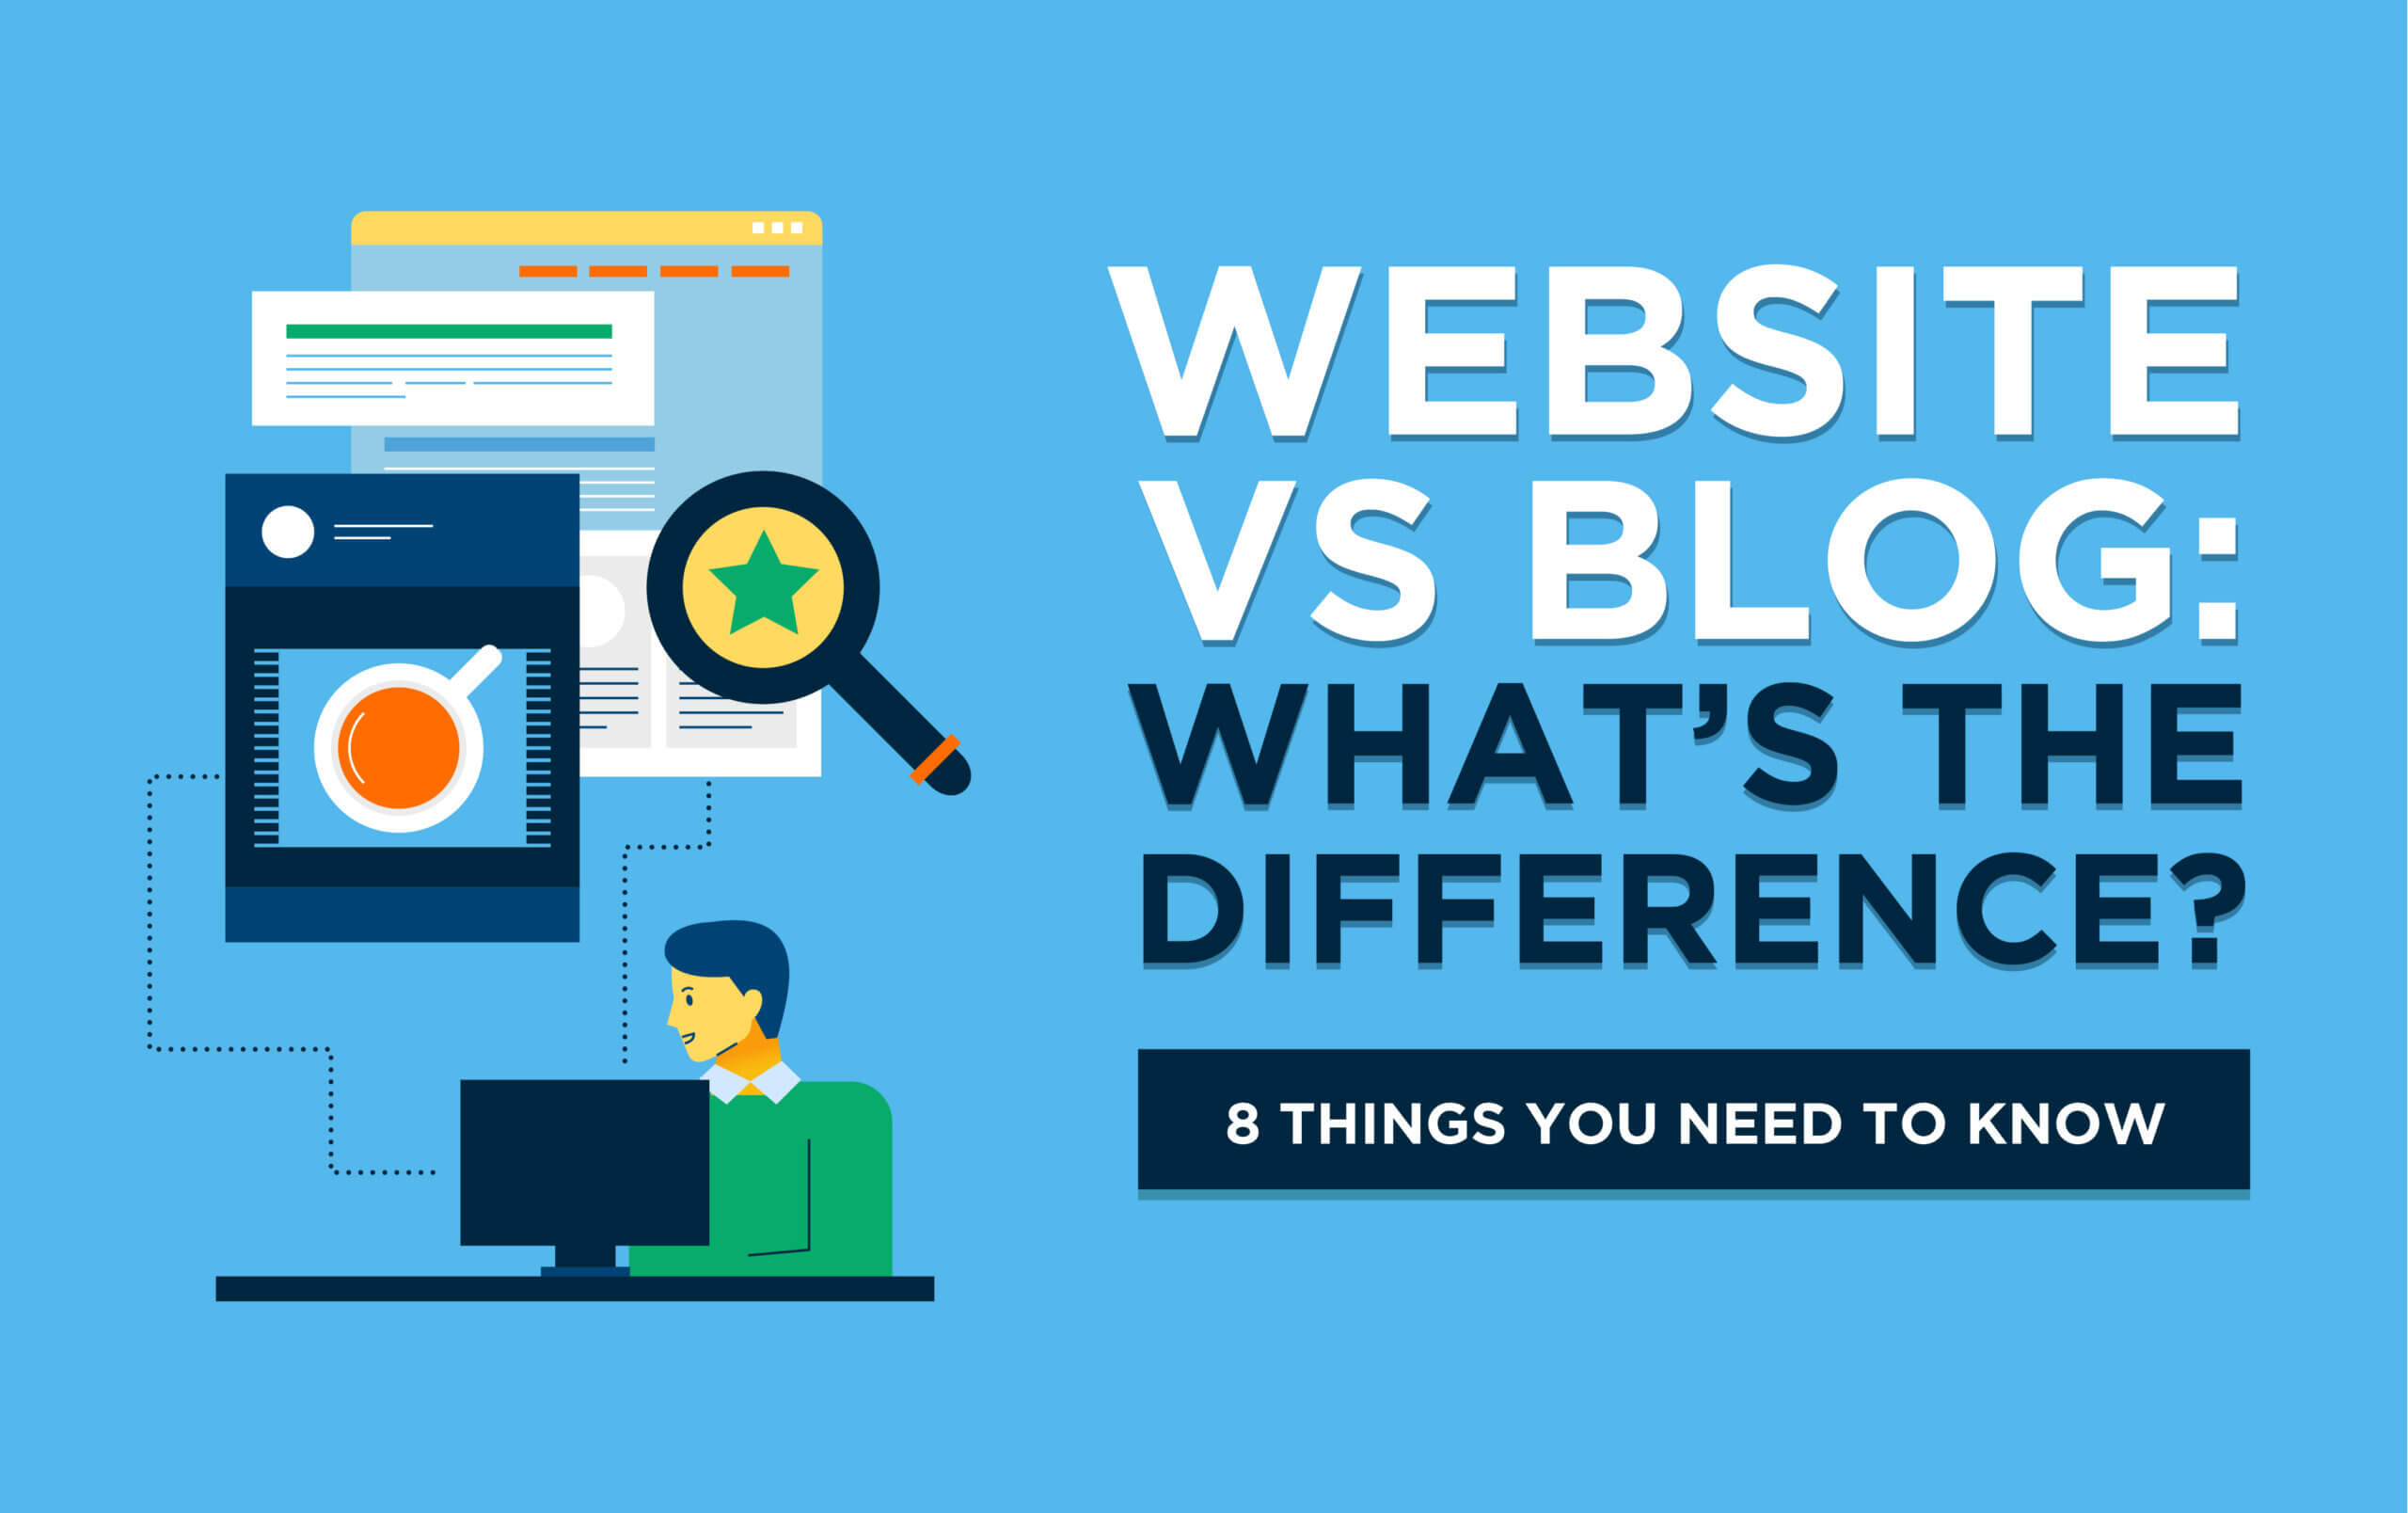 Website vs Blog: What's the Difference? 8 Things You Need to Know